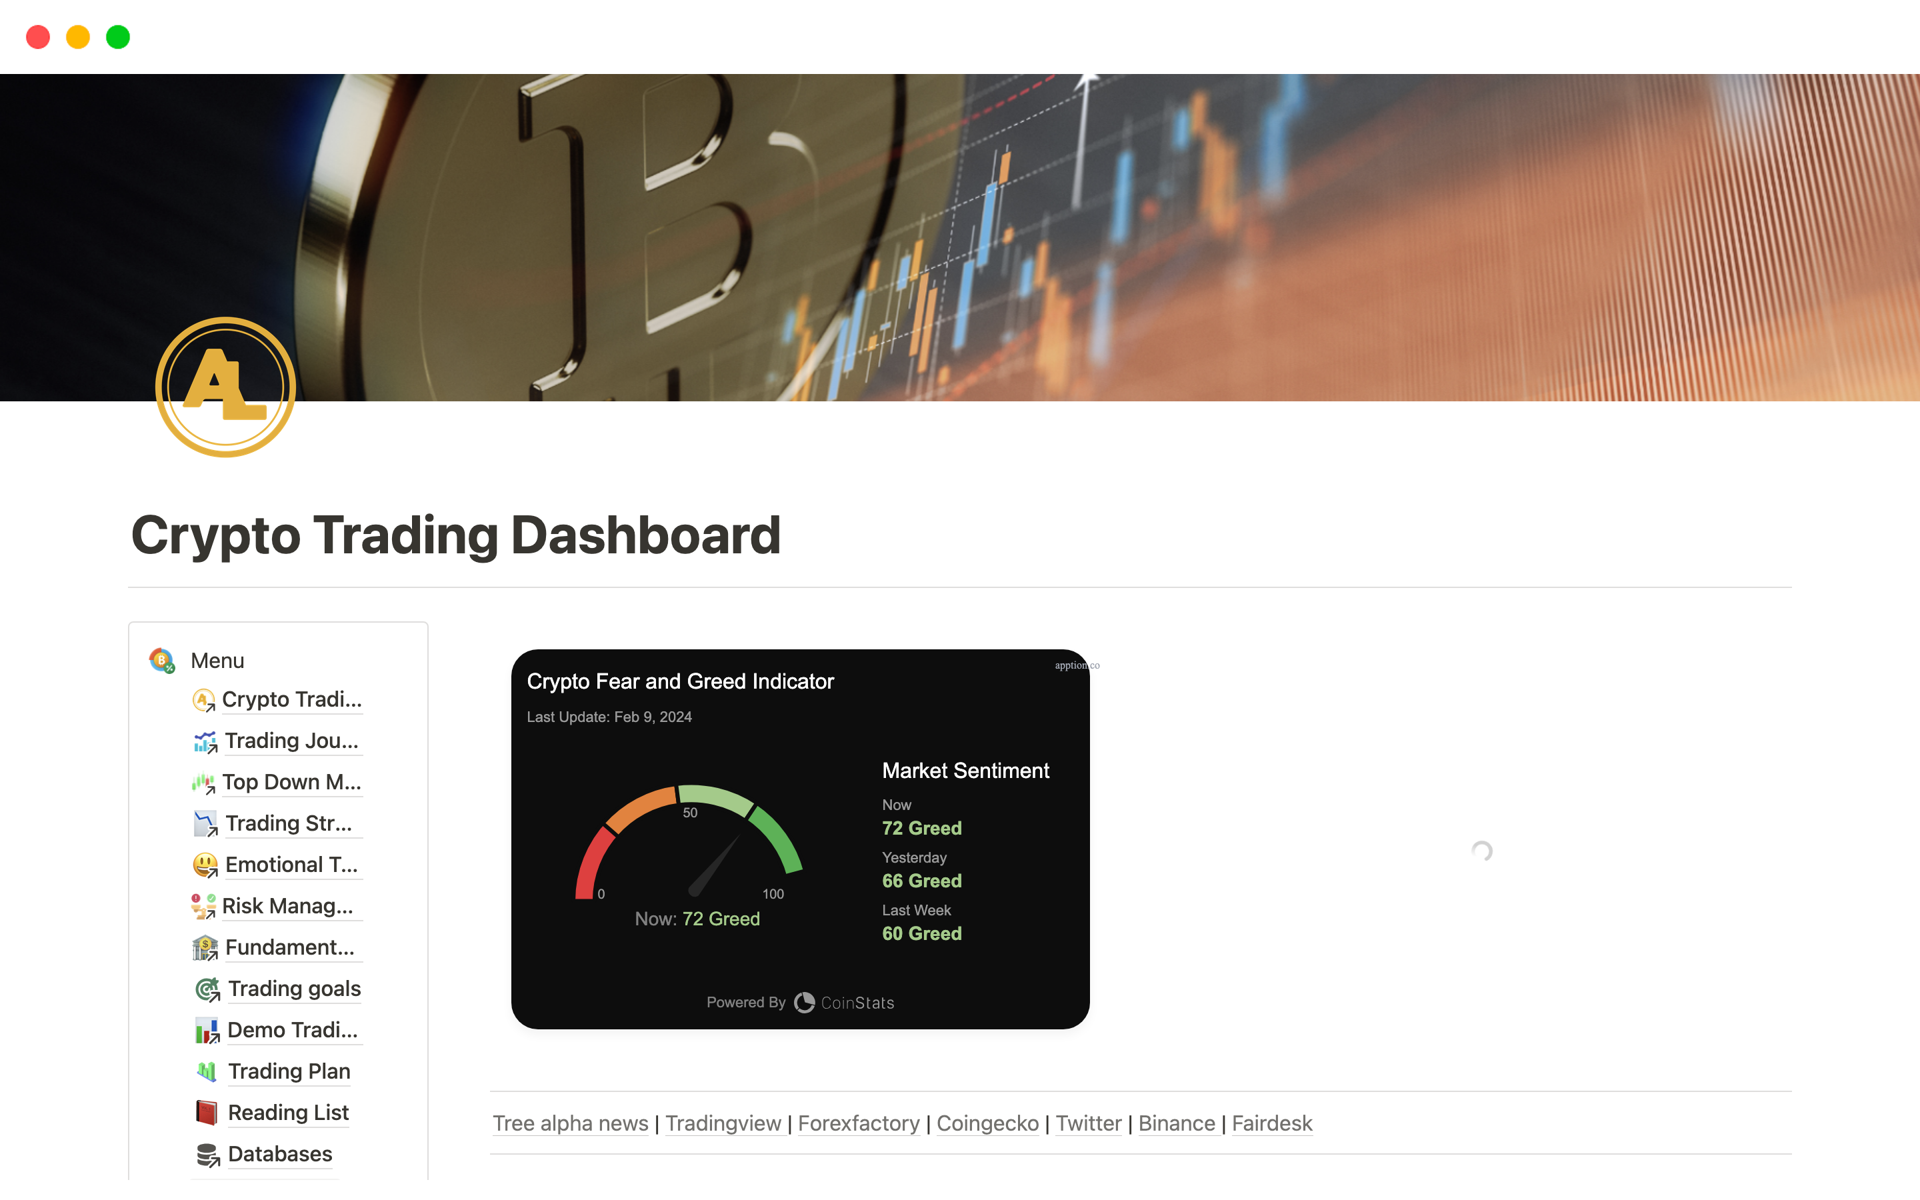 Streamline your crypto trading with a comprehensive dashboard featuring strategic planning tools, market analysis, and performance tracking.